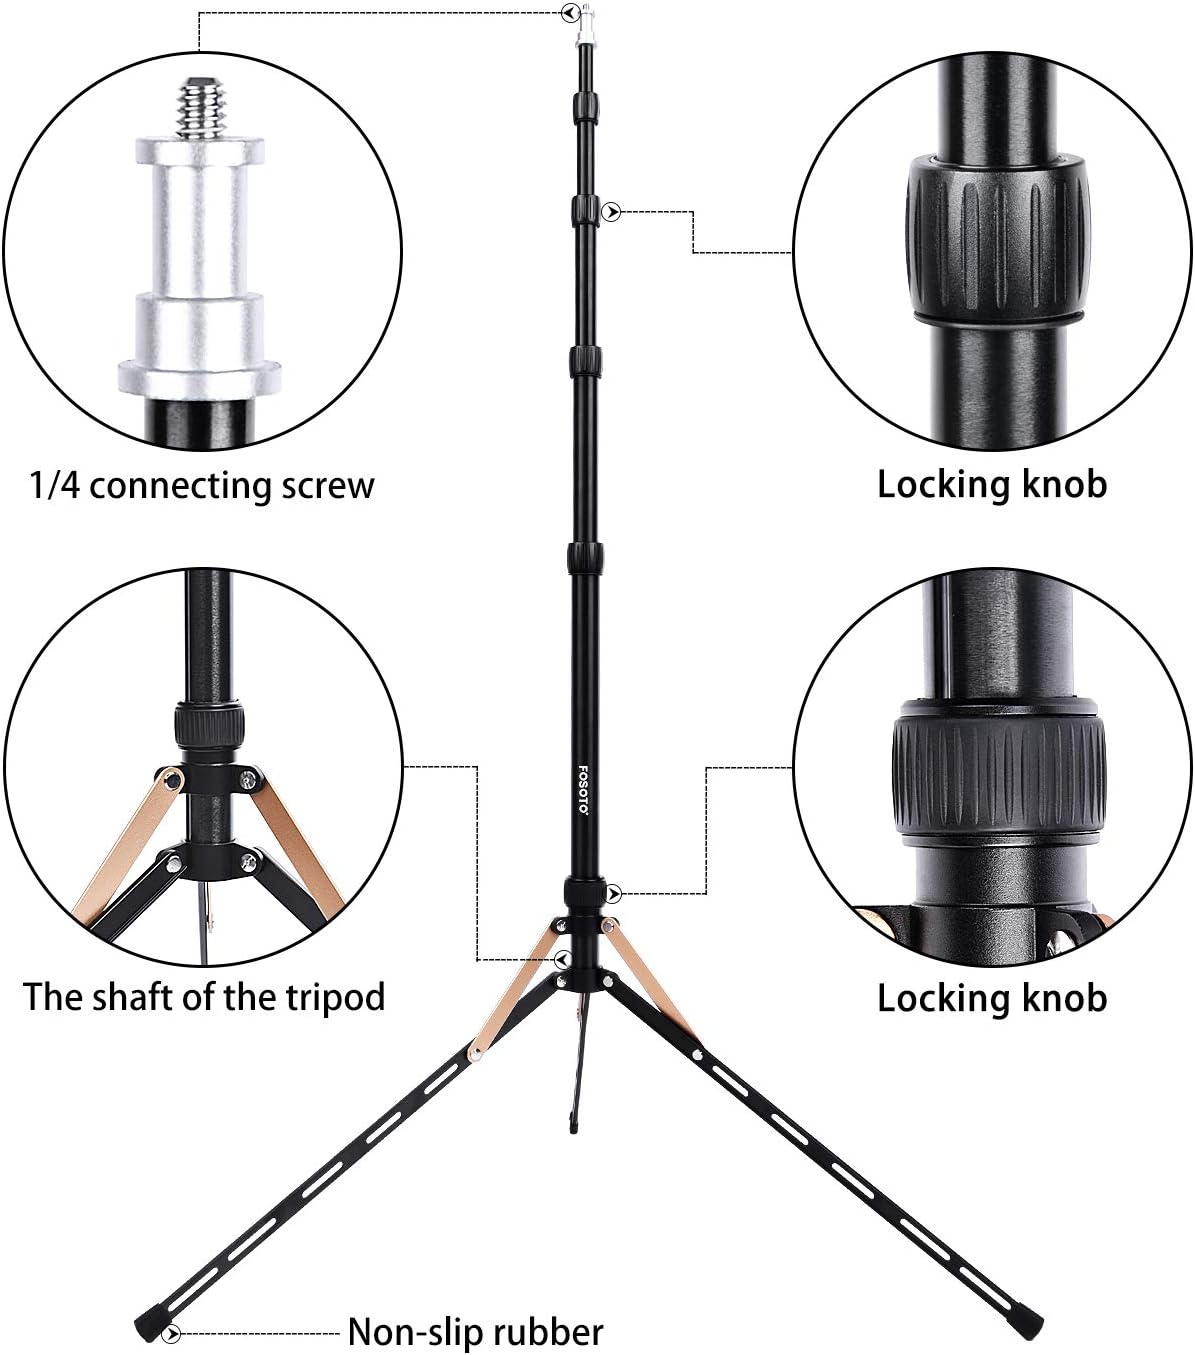 FOSOTO FT-190B 87in Aluminum Alloy Photography LED Light Tripod Stand for Photo Studio Ring Photographic Light, DSLR Cameras, Softbox, Umbrella, Flash, Portrait Shooting Lighting Stand